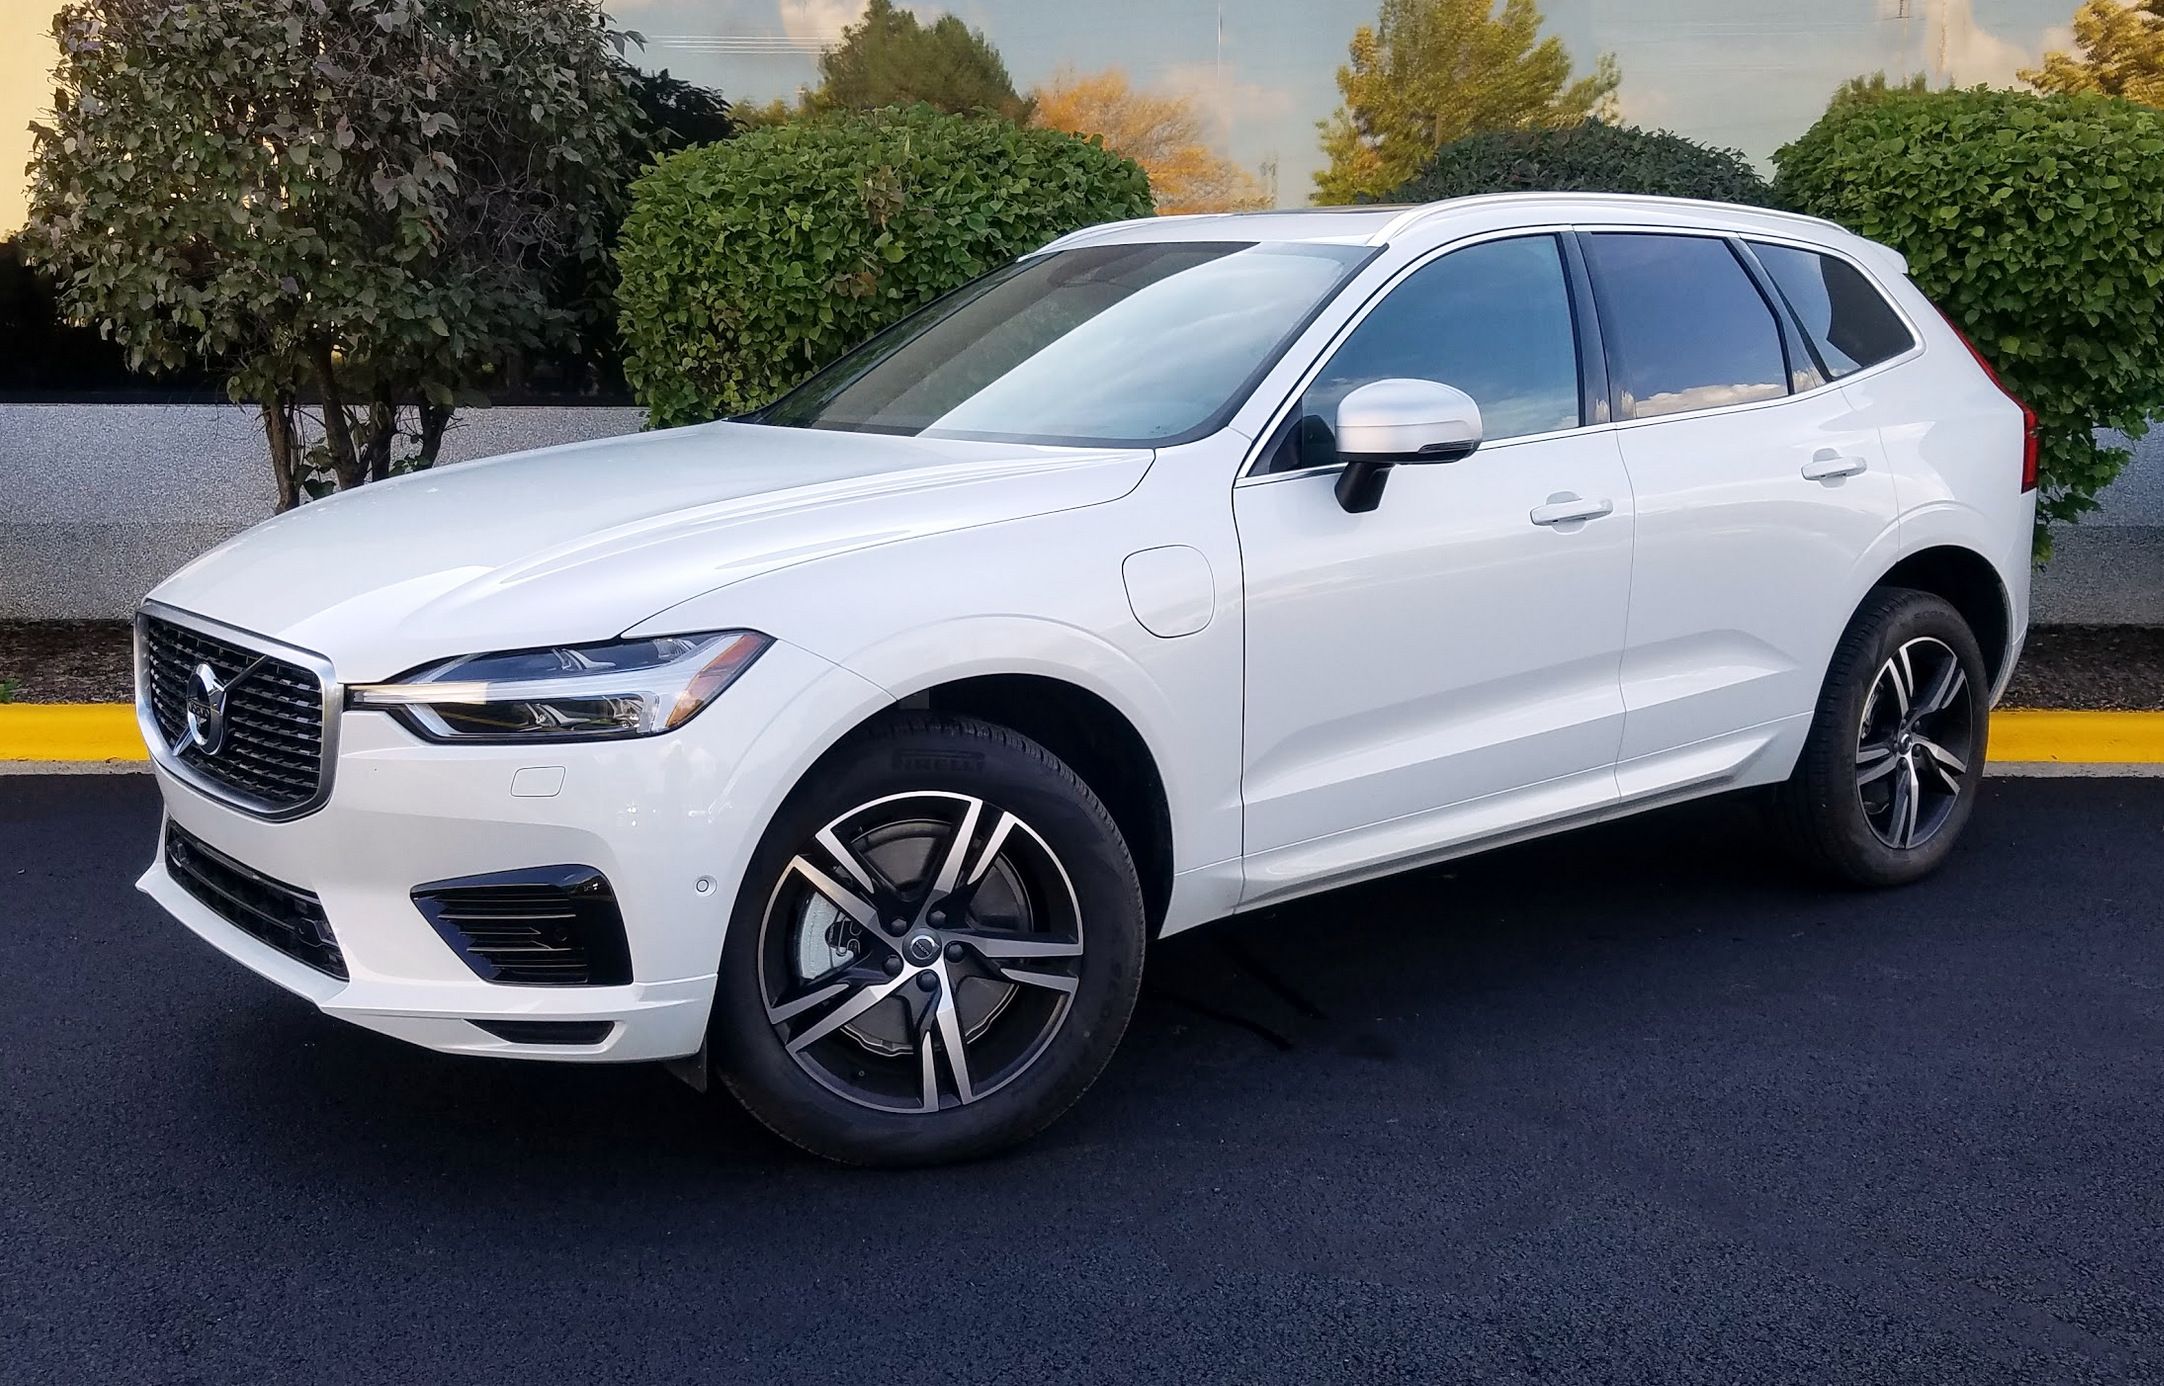 Laan Te Concurreren Quick Spin: 2019 Volvo XC60 Plug-in Hybrid | The Daily Drive | Consumer  Guide® The Daily Drive | Consumer Guide®